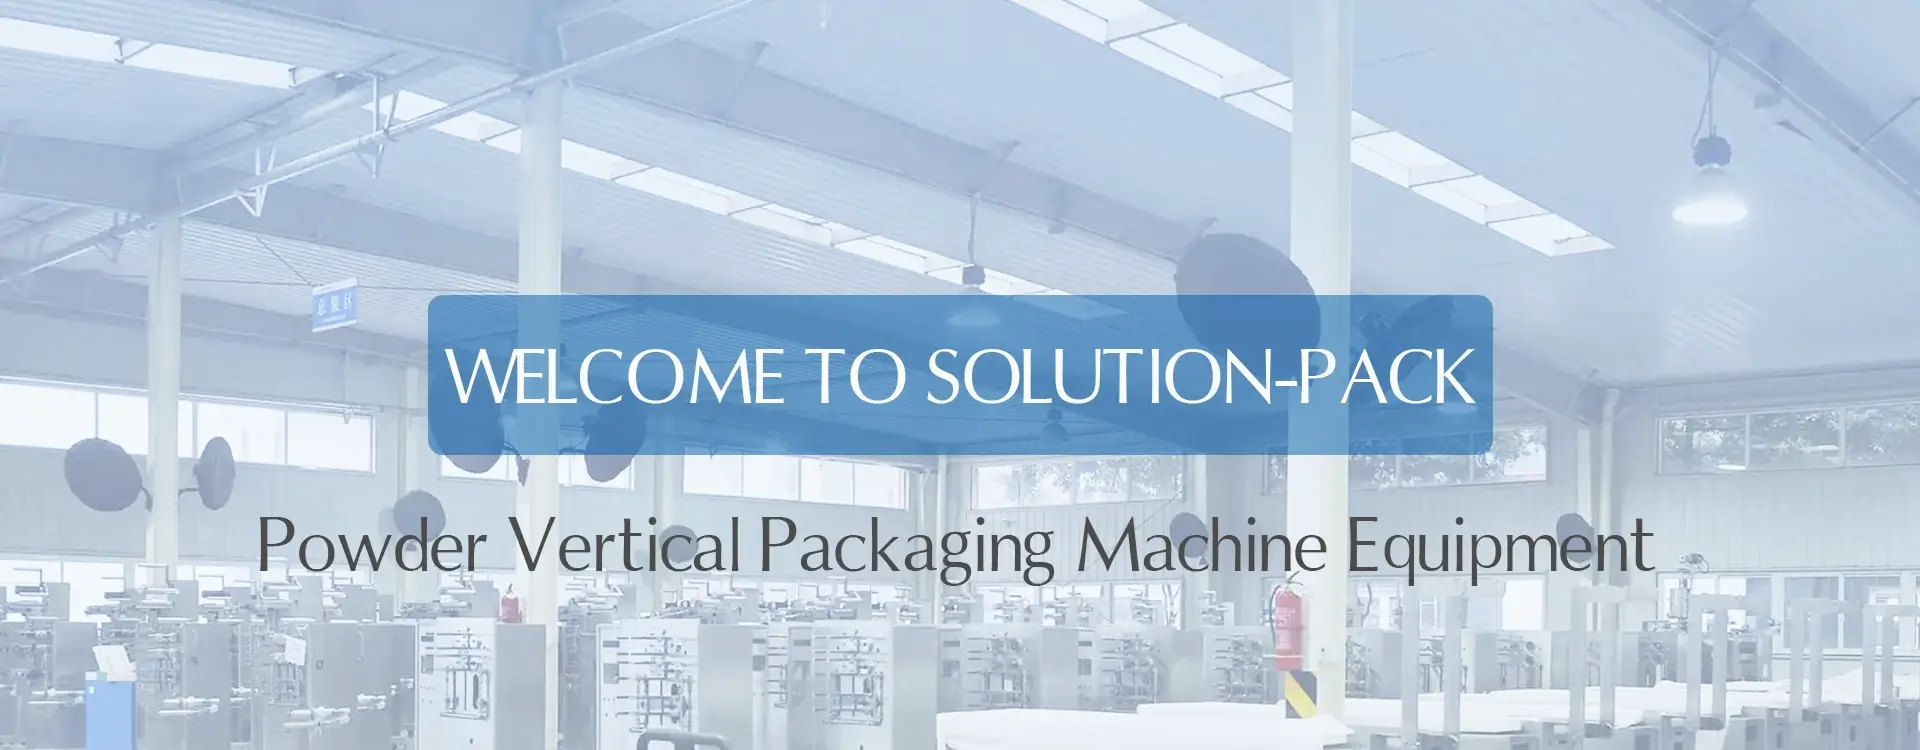 Model VSP630P Automatic Vertical Packaging Machine Unit | Solution-Pack (Middle Banner Picture)